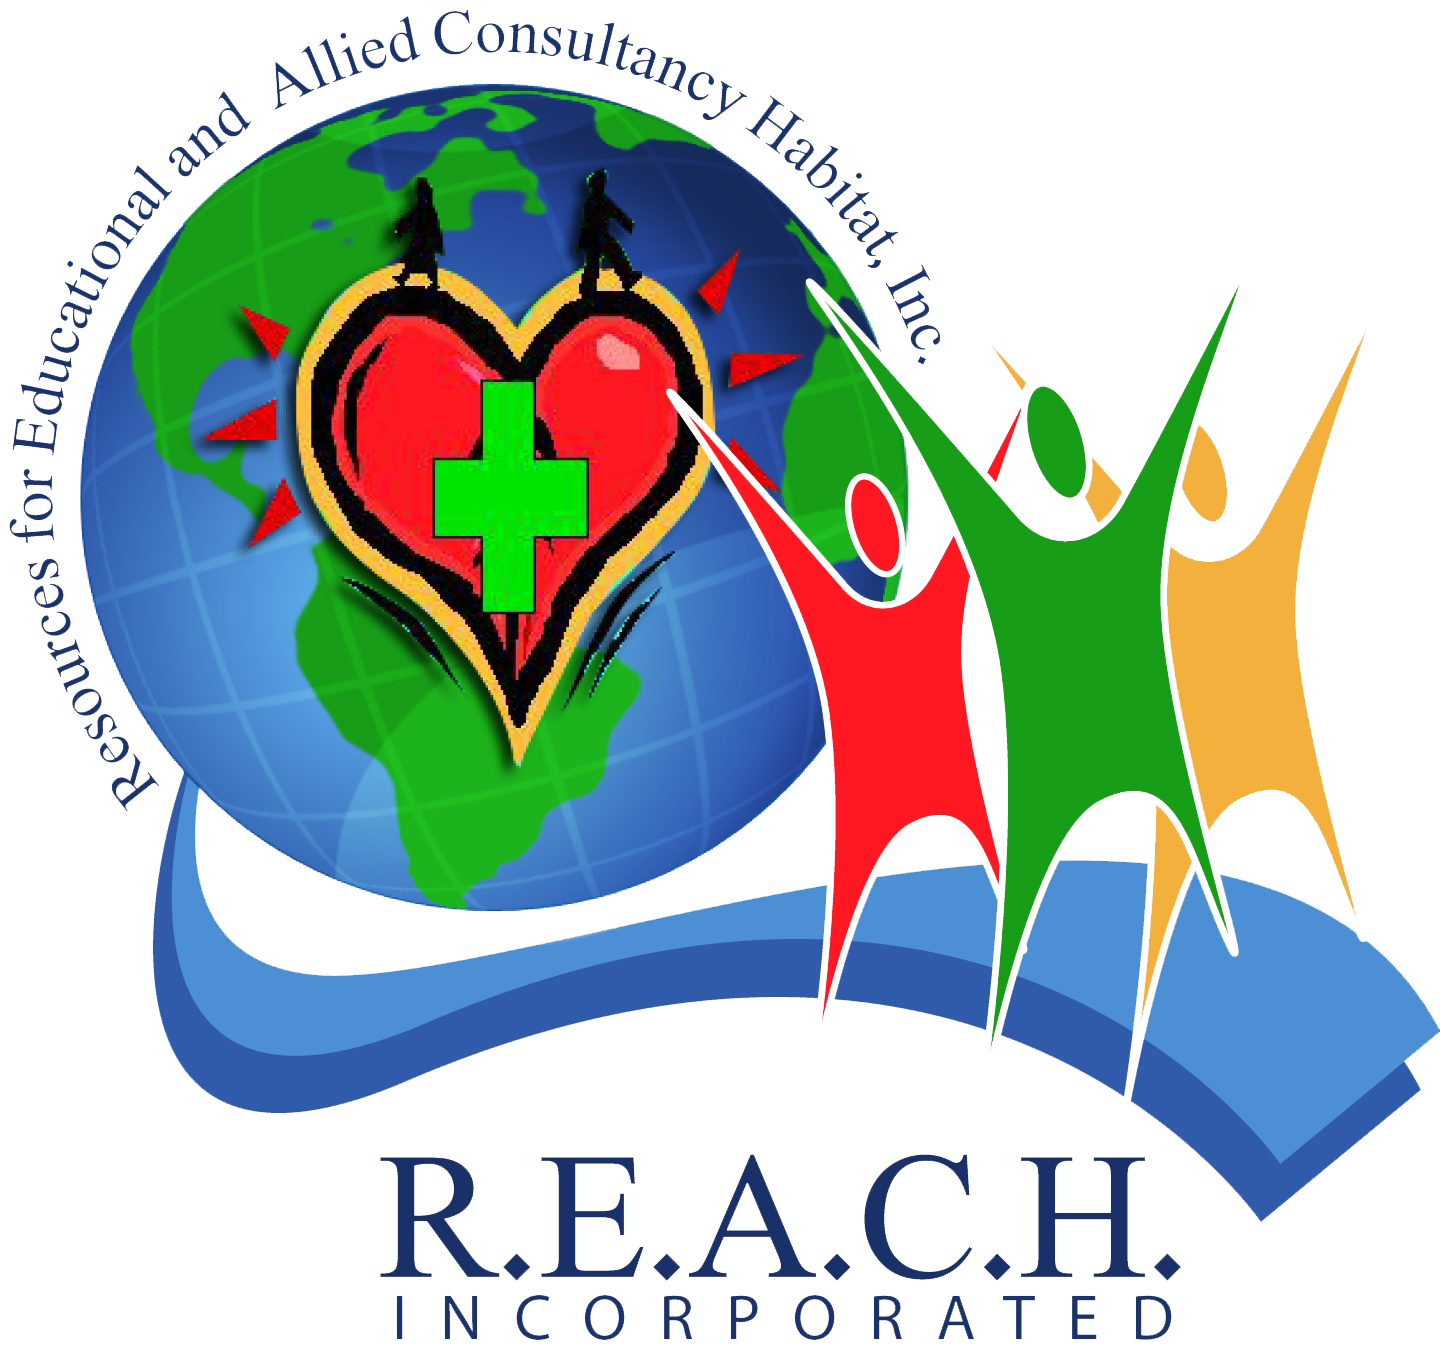 Resources For Educational & Allied Consultancy Habitat (R.E.A.C.H.), Inc. logo